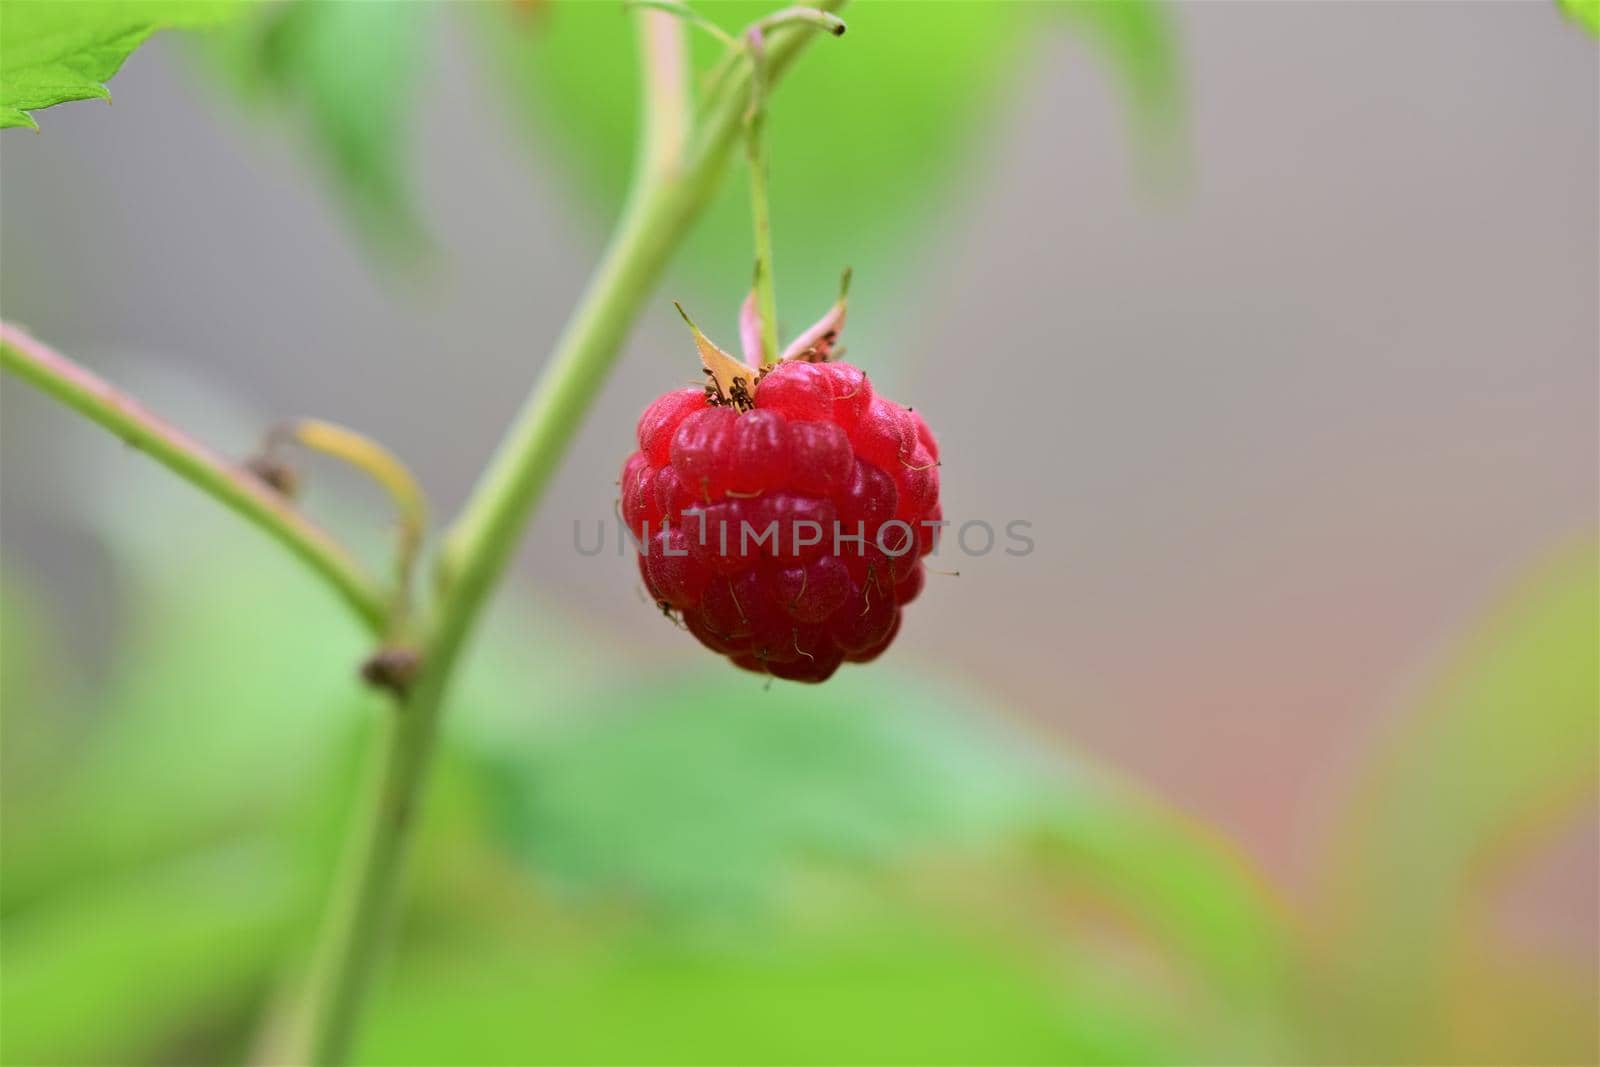 Ripe red raspberry as a close-up